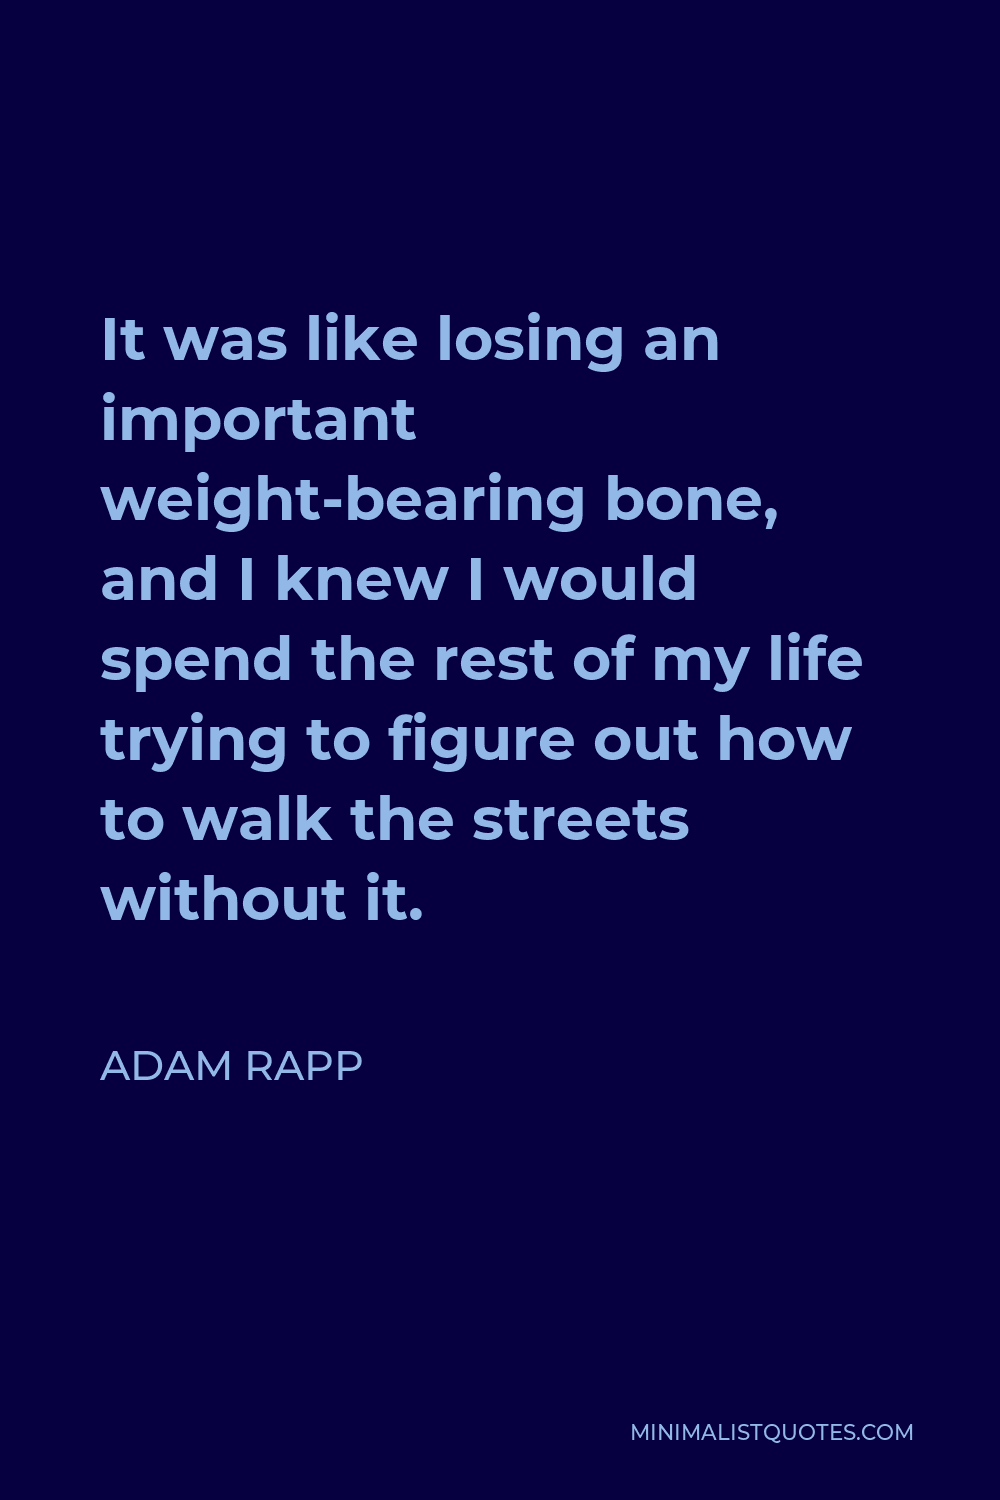 Adam Rapp Quote - It was like losing an important weight-bearing bone, and I knew I would spend the rest of my life trying to figure out how to walk the streets without it.